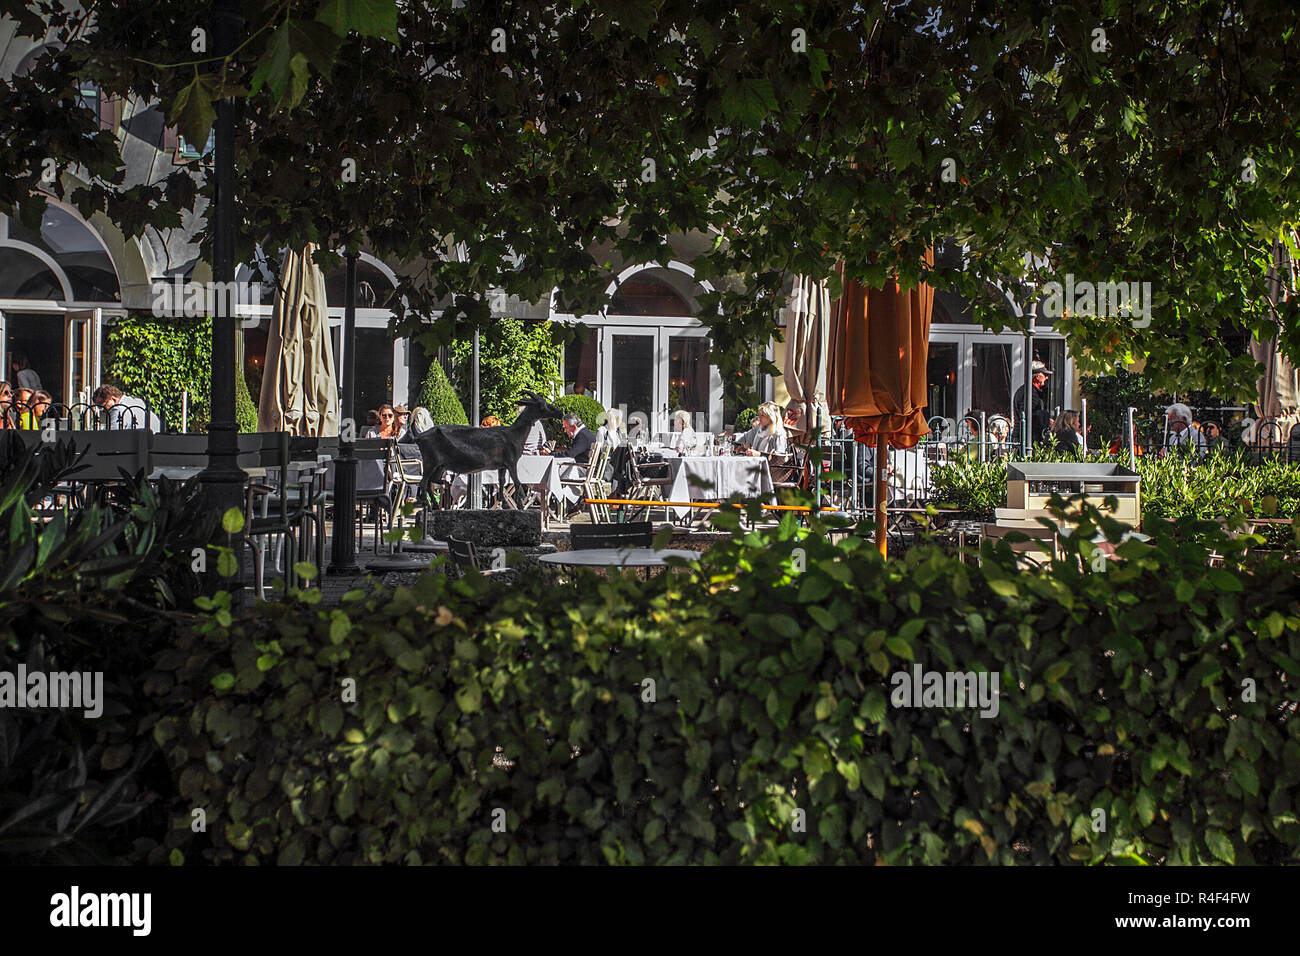 Clientele eating outside on the veranda of The Seehaus Restaurant in the English Garden of Munich, Germany. Stock Photo